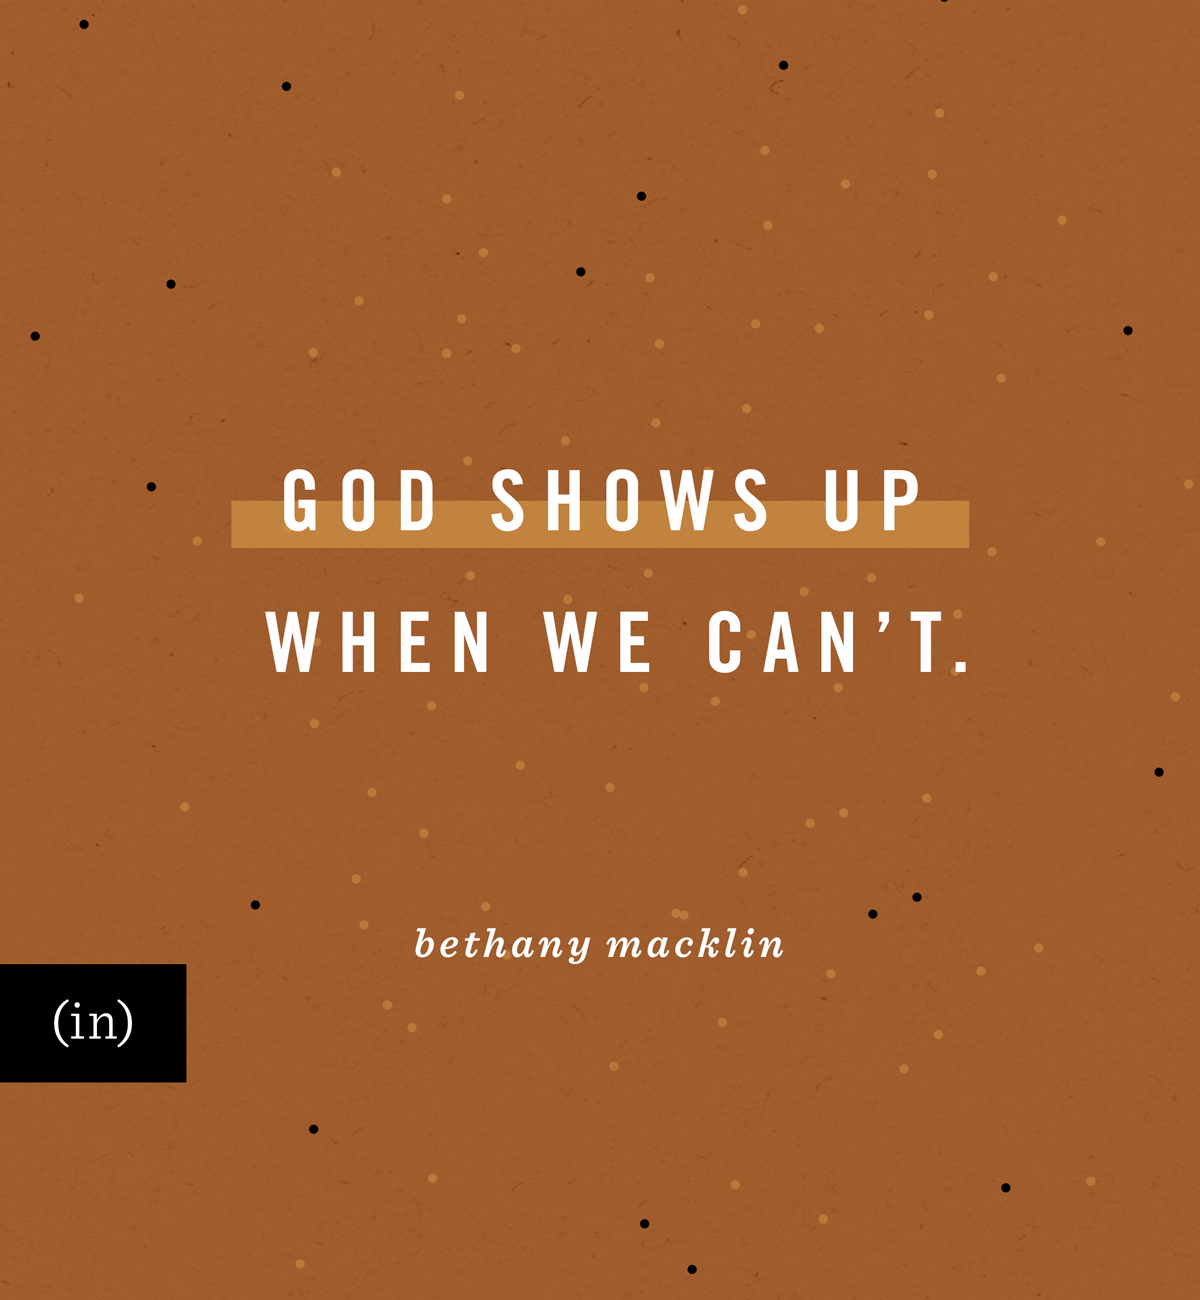 God shows up when we can’t. -Bethany Macklin